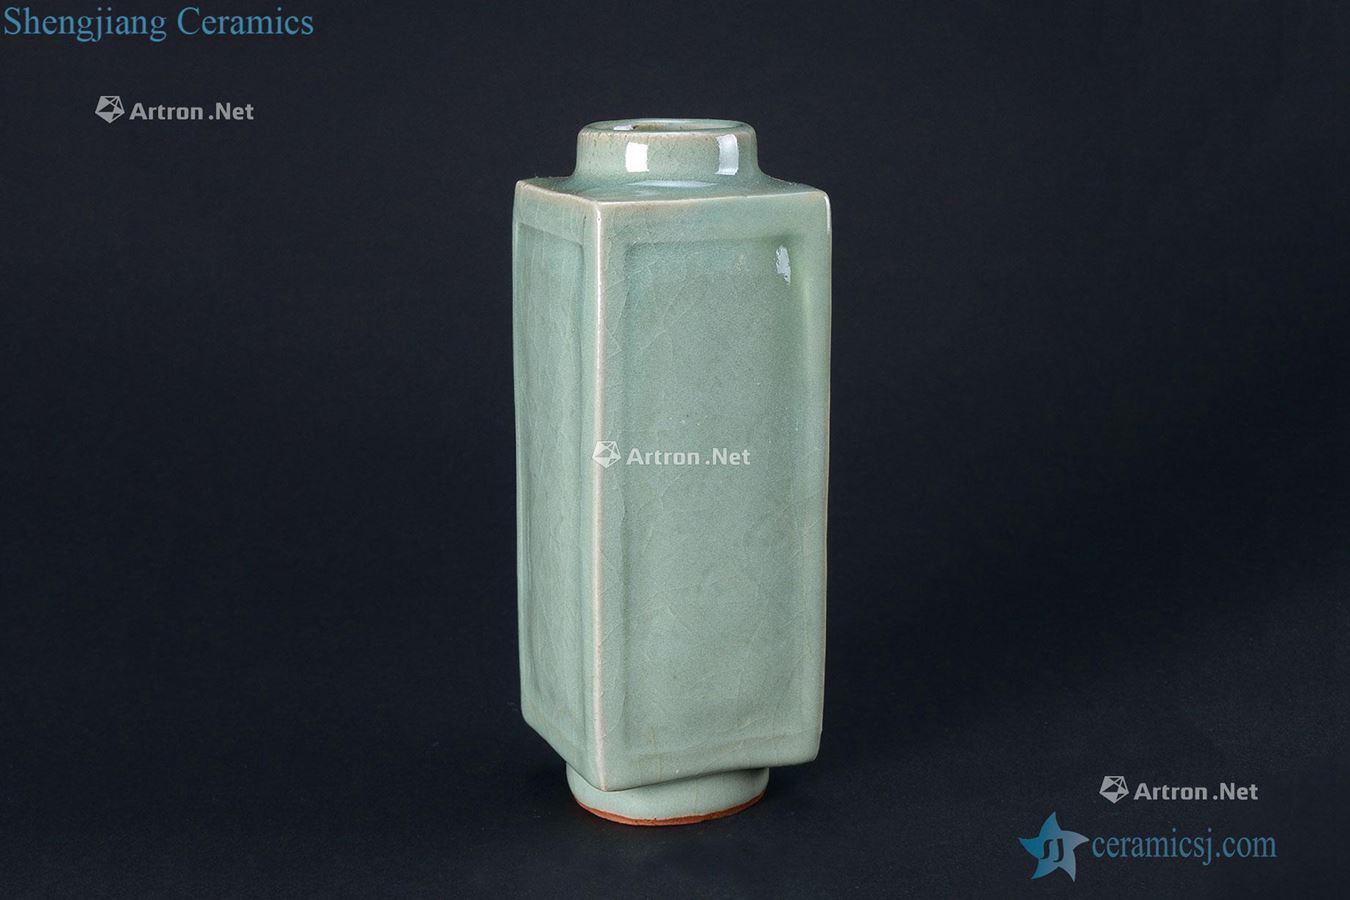 In the Ming dynasty (1368-1644), longquan celadon sifang receptacle